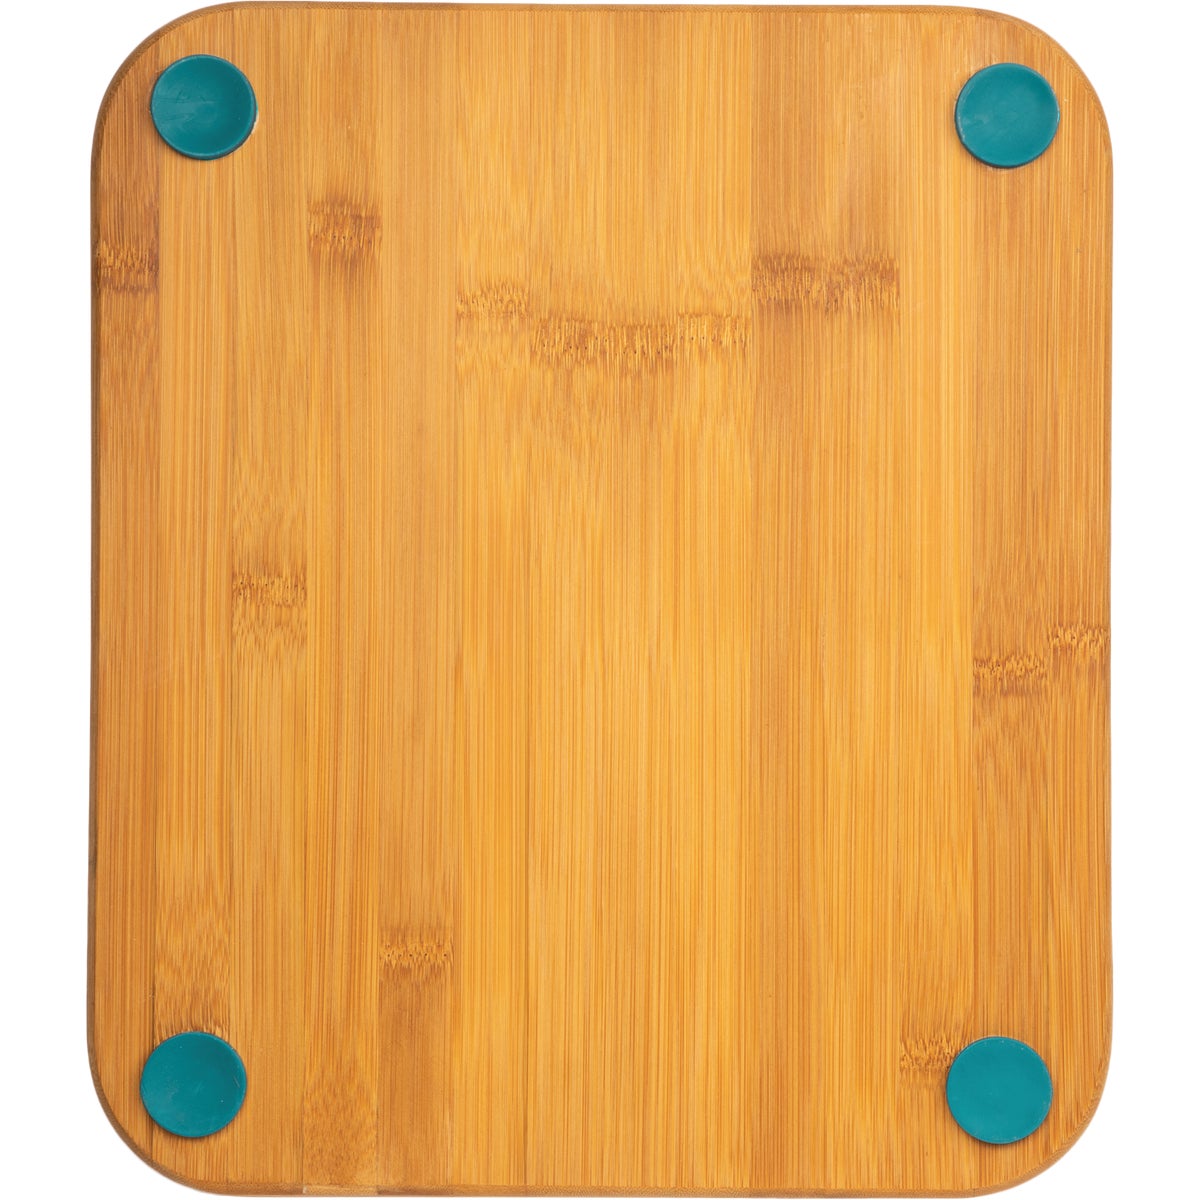 Core Bamboo 12 In. Square Natural Lake Blue Foot Grip Cutting Board